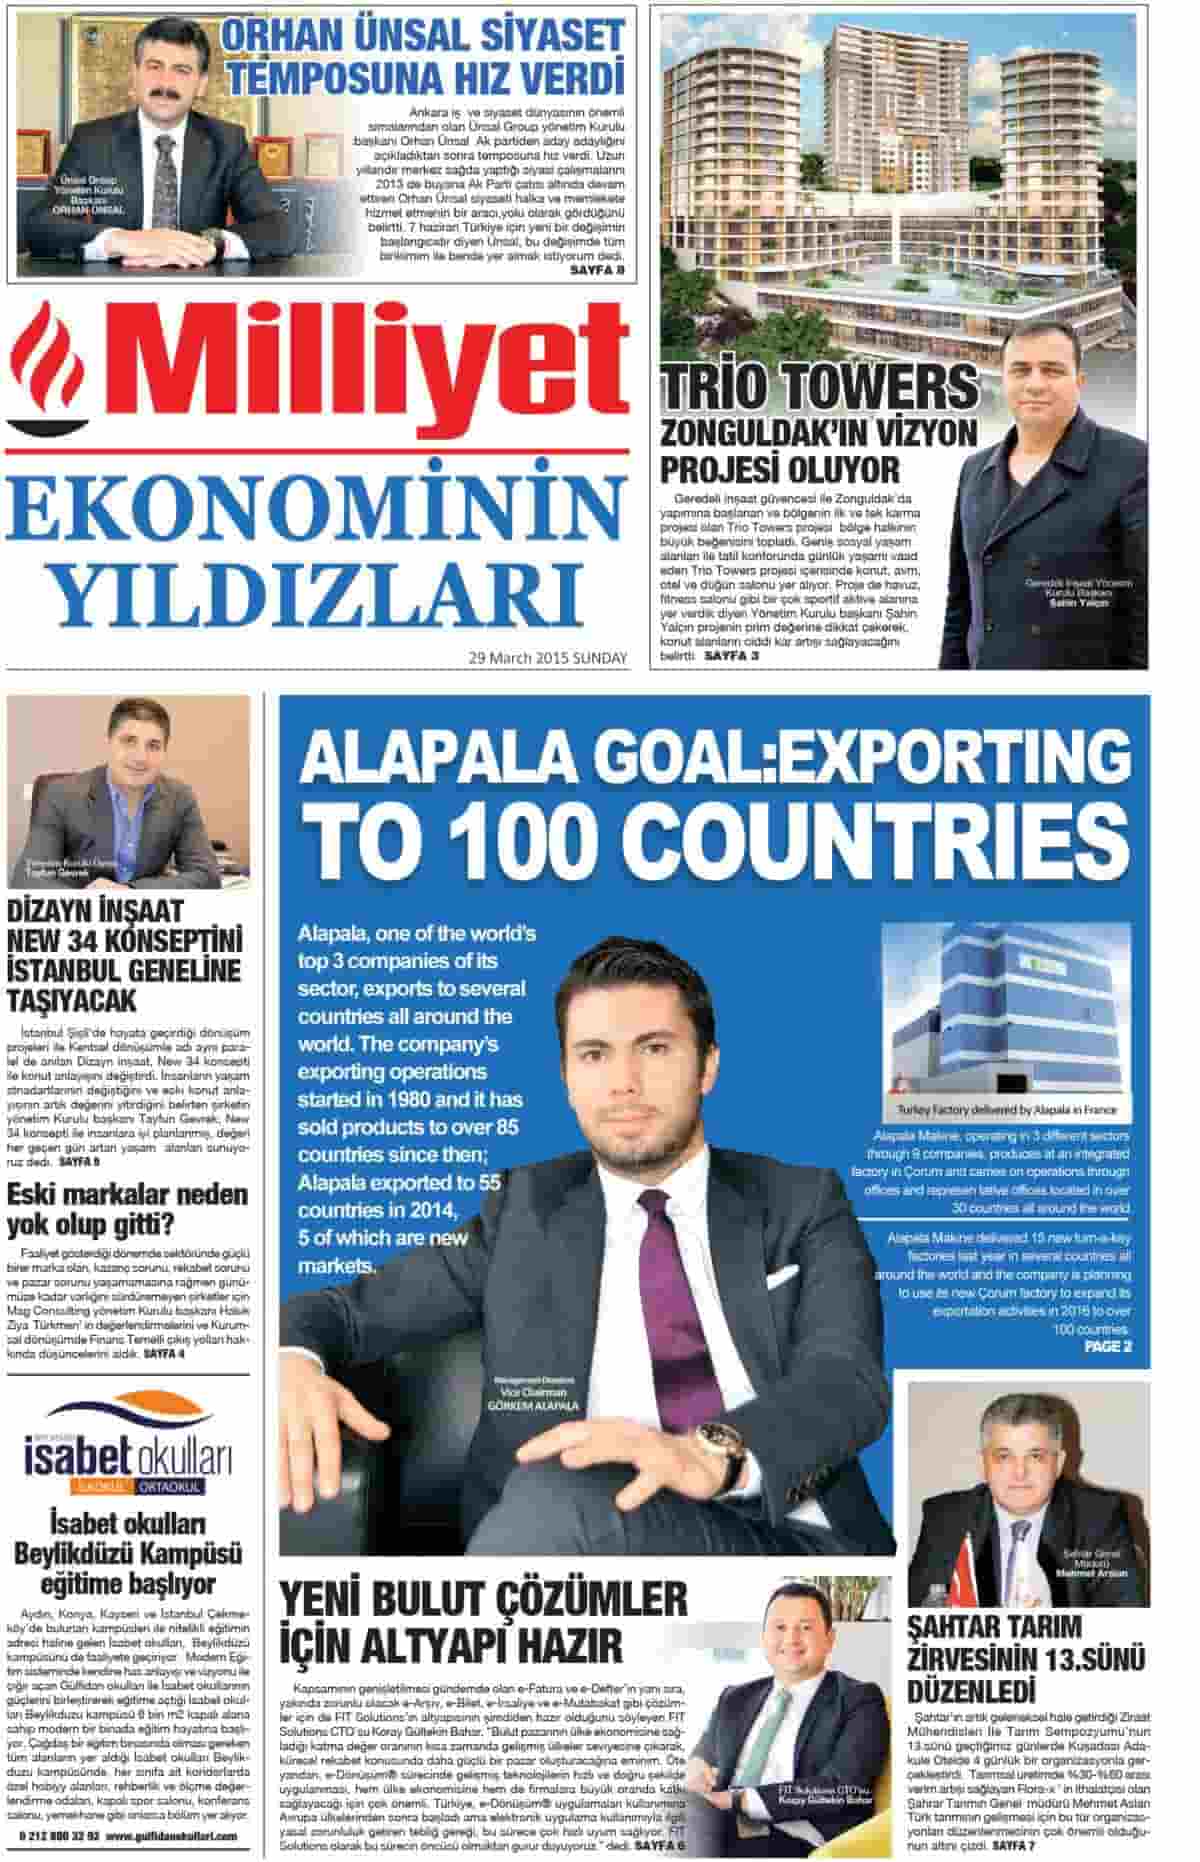 ALAPALA’S GOAL: EXPORTING TO 100 COUNTRIES